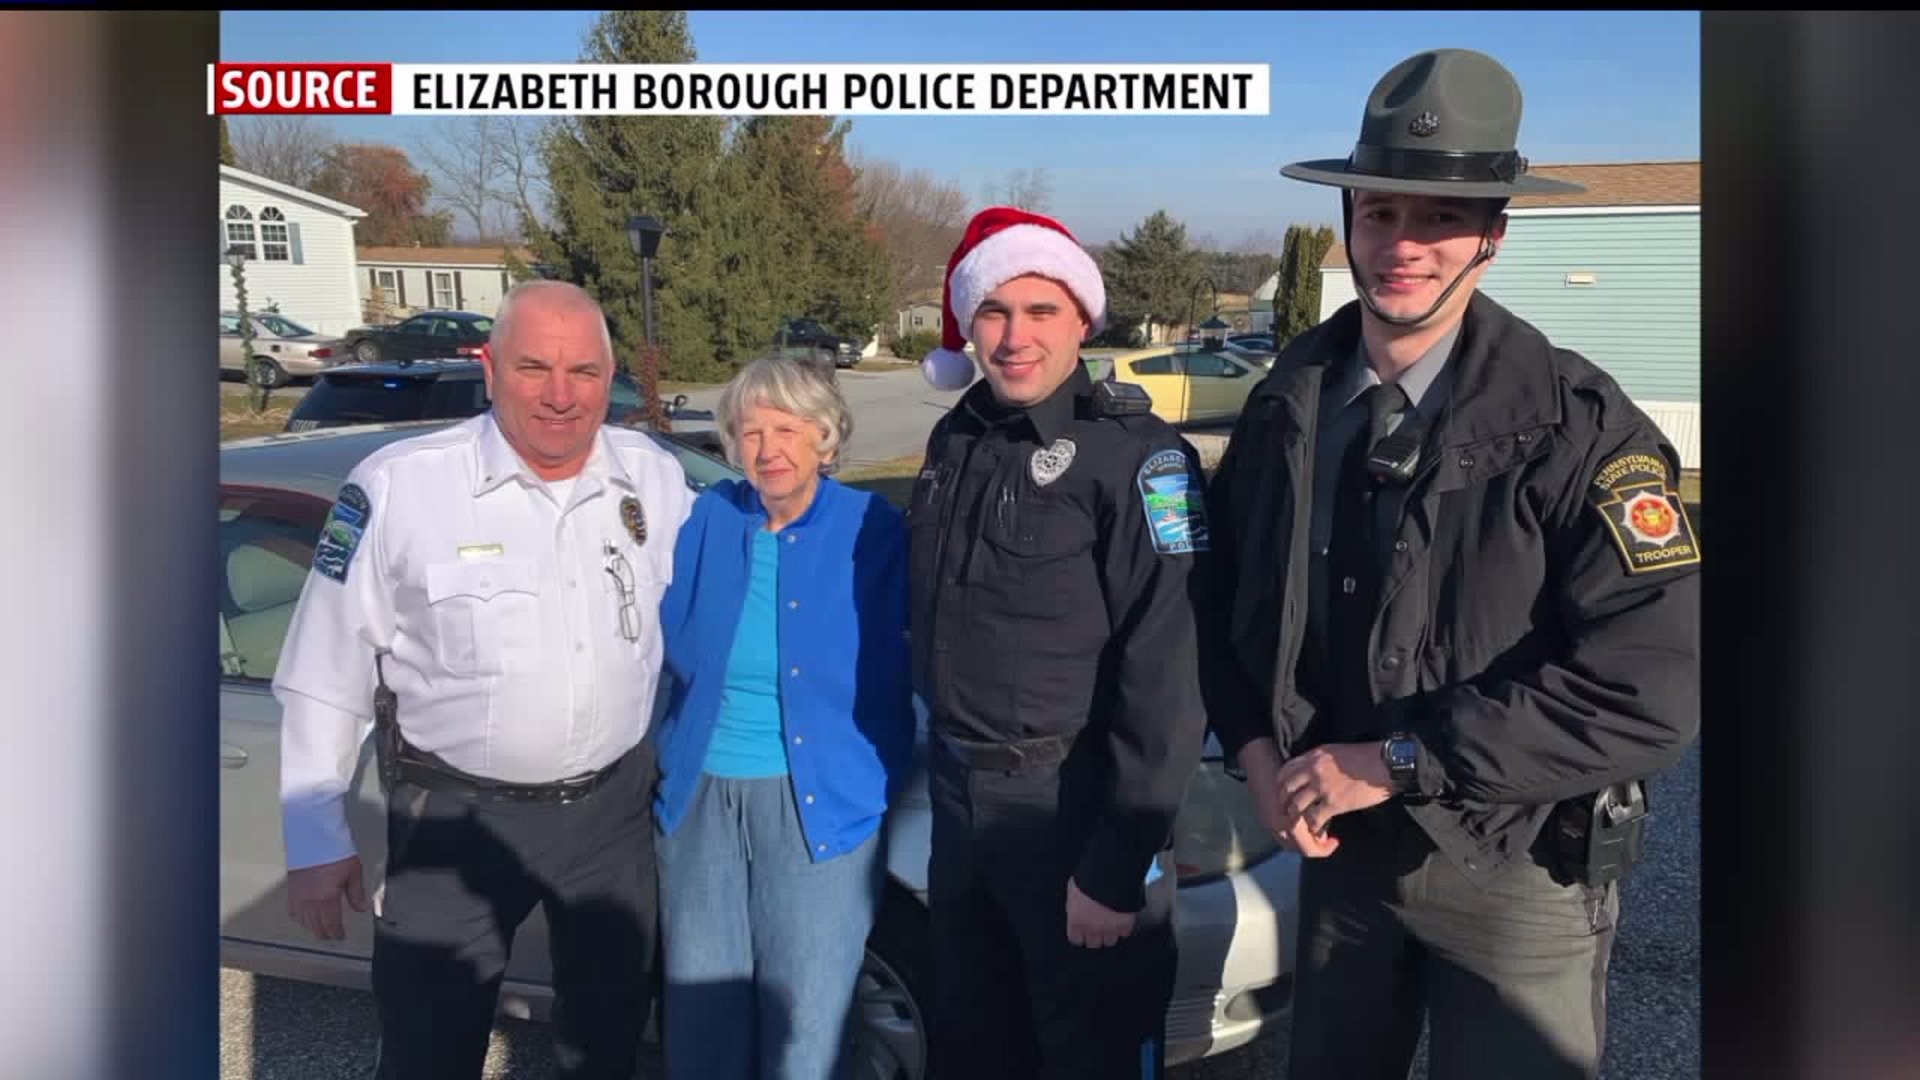 Police go the extra mile to bring an elderly lost driver home